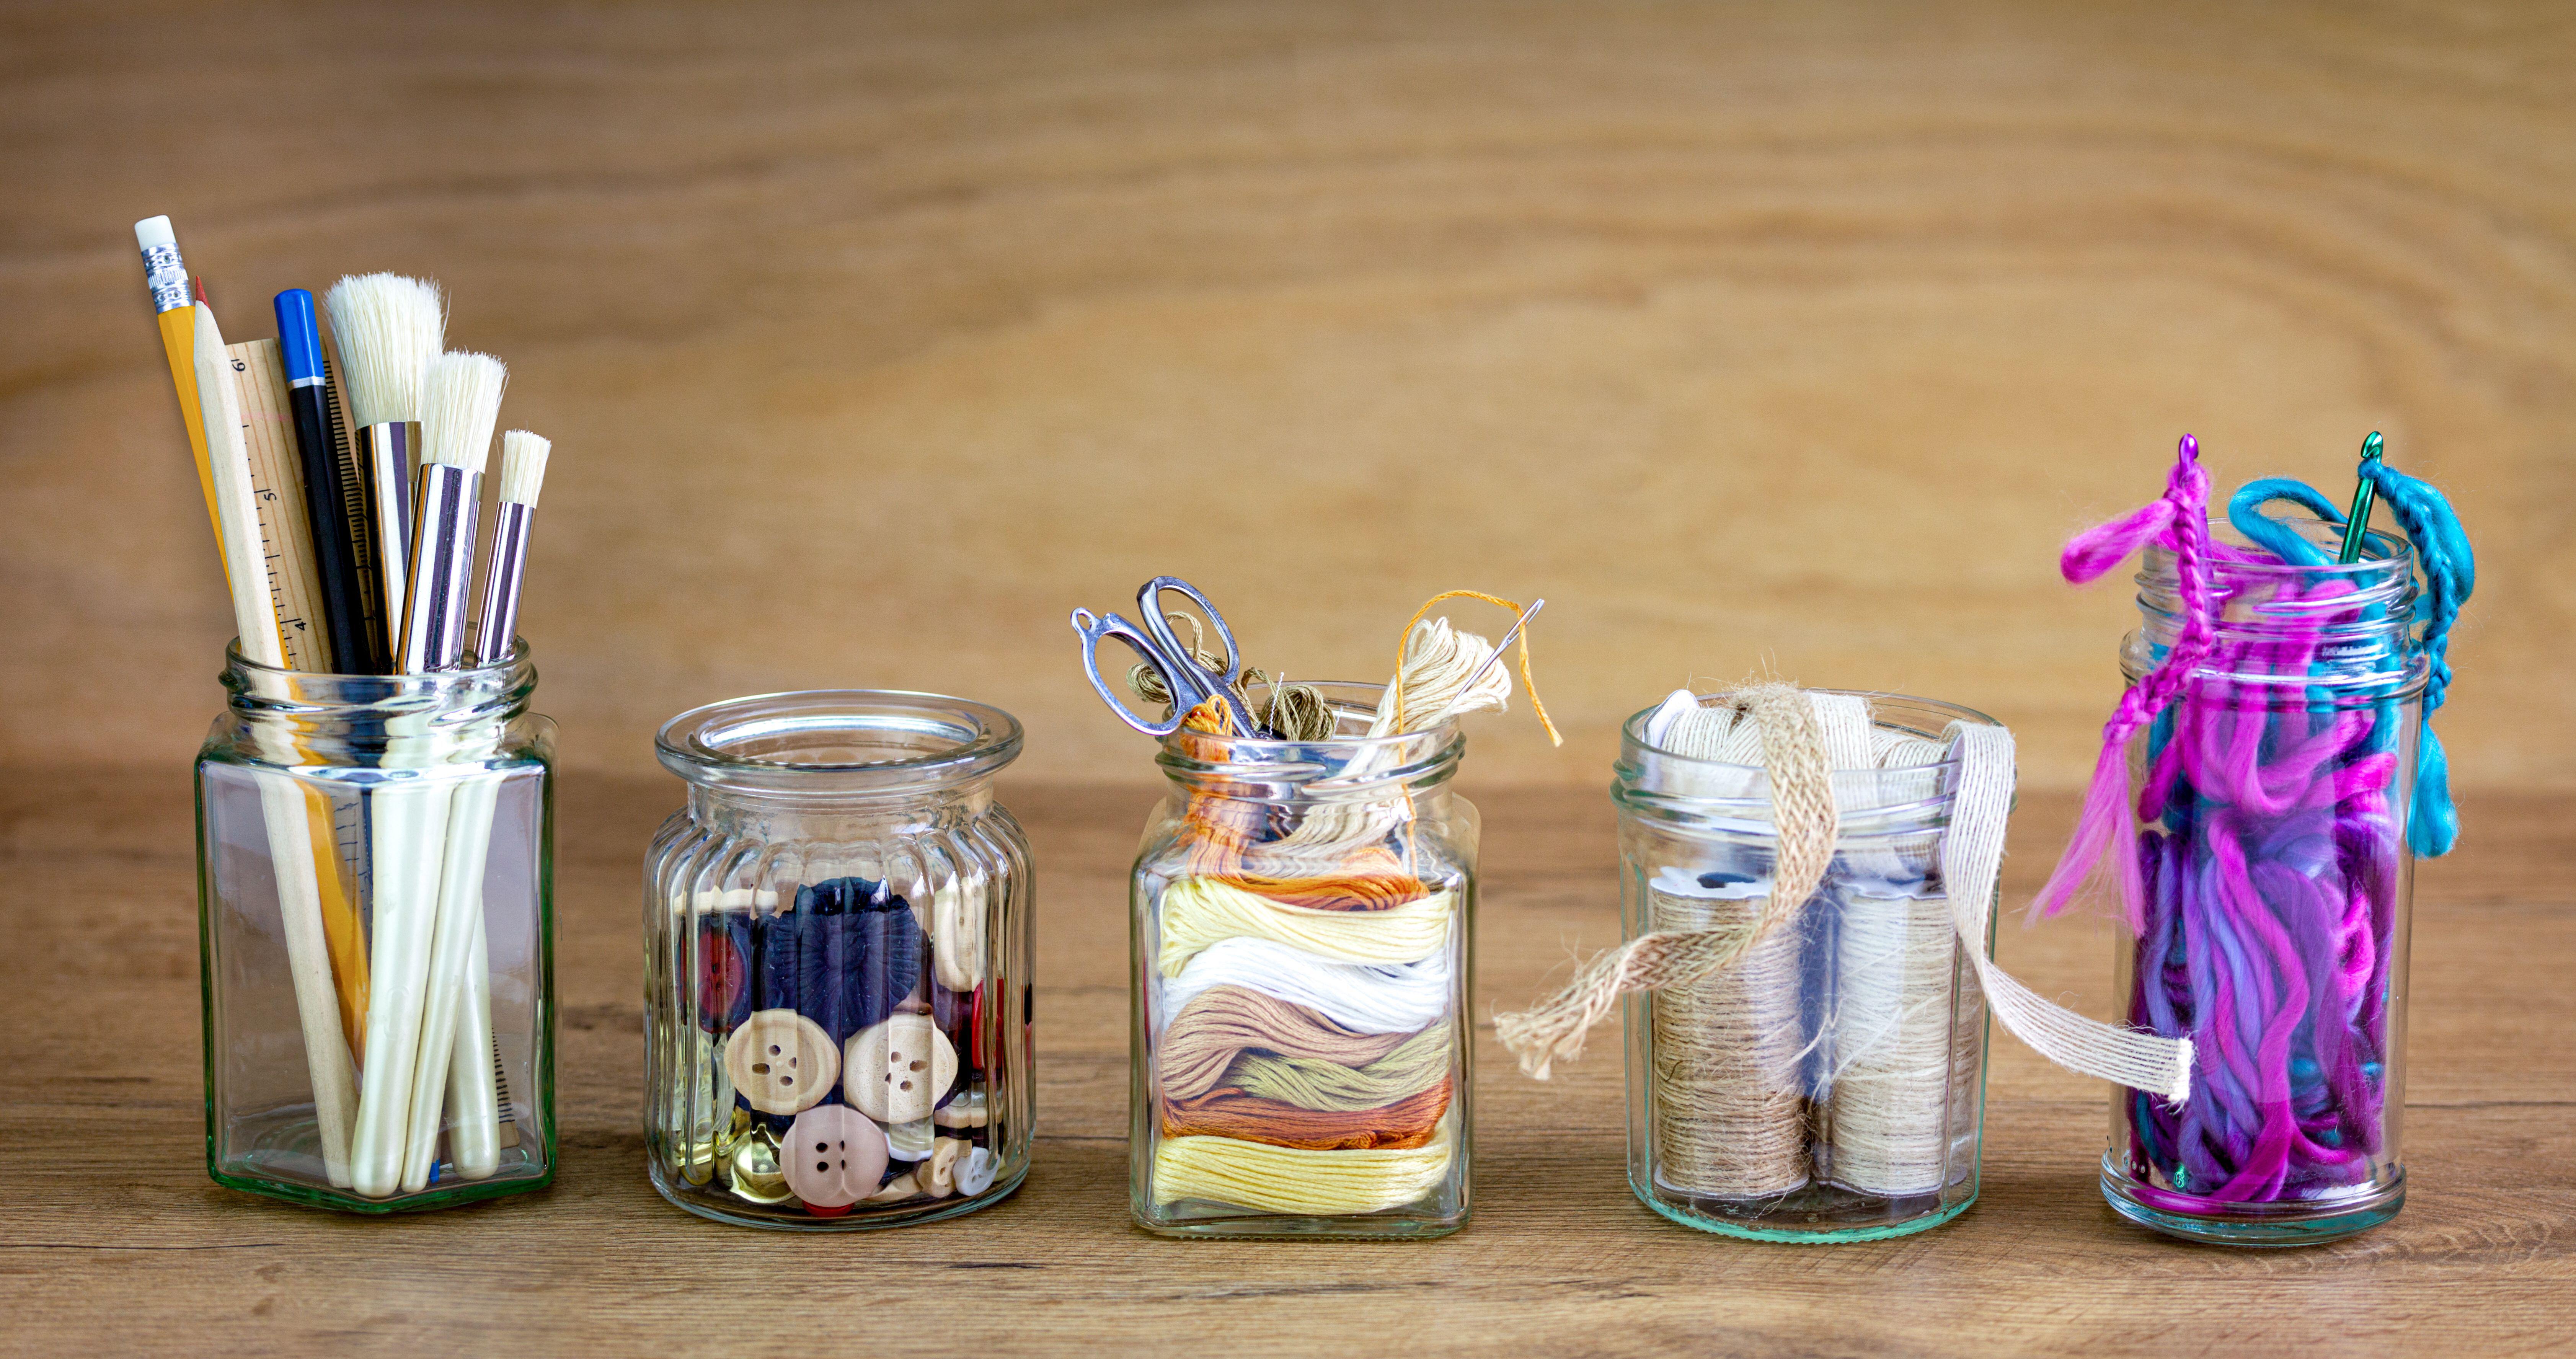 3 Steps to Organize Scrapbooking Supplies in A Small Space